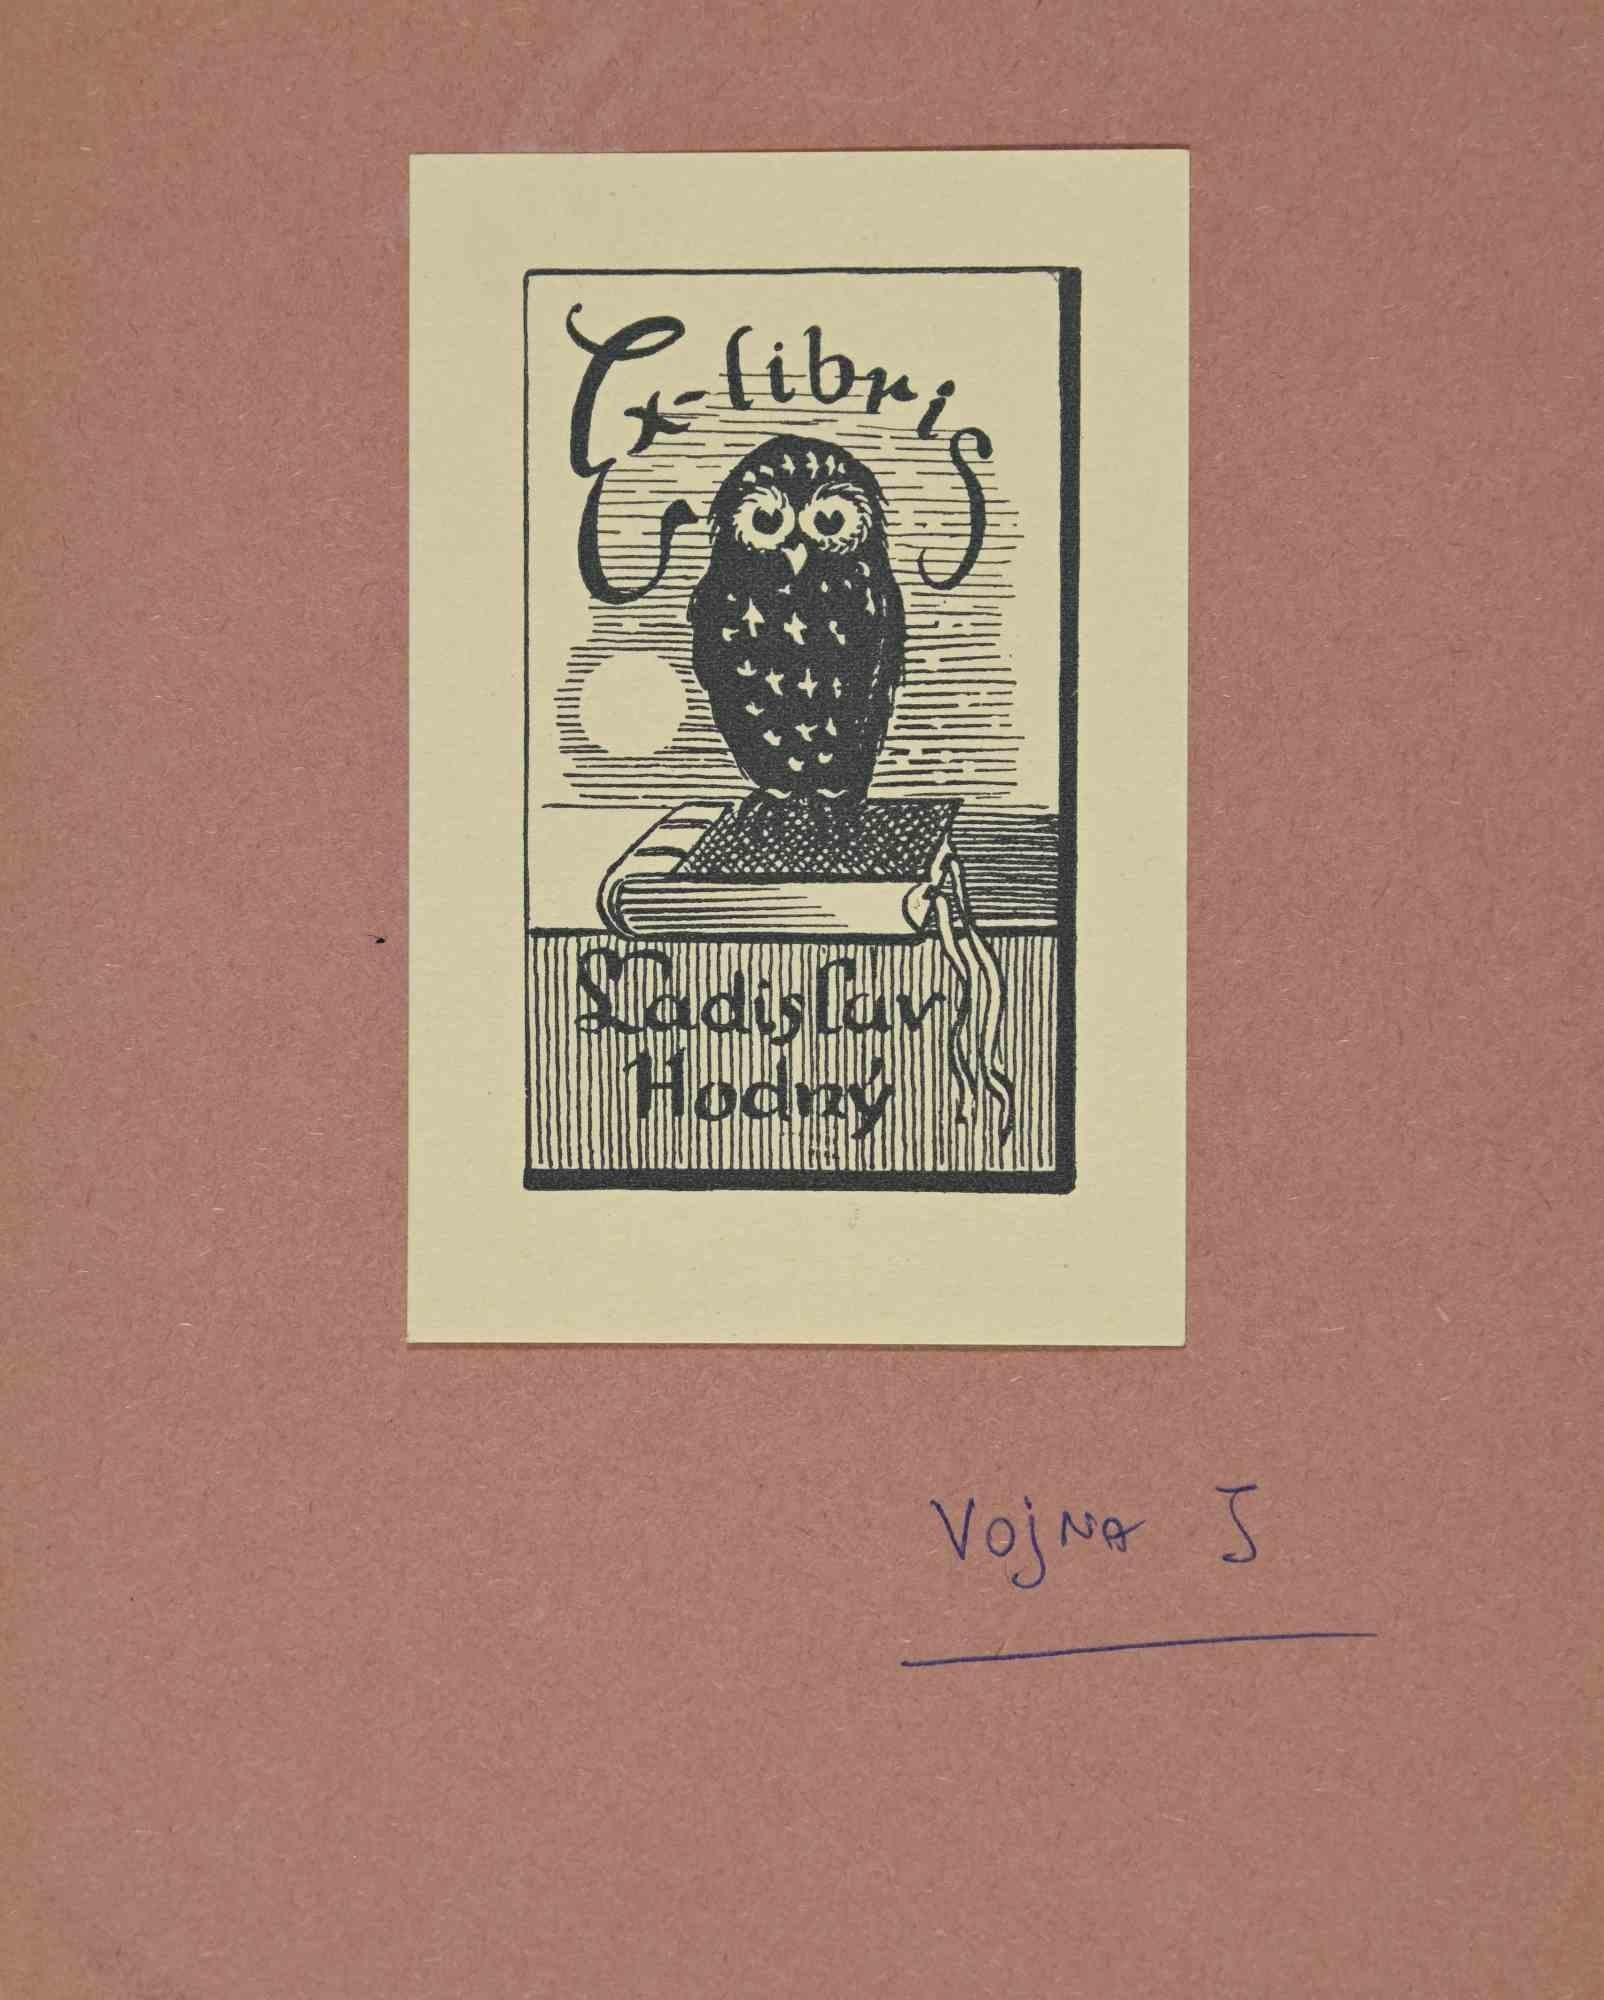 Ex Libris - Ladislav Hodny is an Artwork realized in 1950 s. by the Artist Jaroslav Vojna, from Czech Republic. 

Woodcut B./W. print on ivory paper. Signed on plate on back. The work is glued on colored cardboard.

Total dimensions: 20 x 16.5